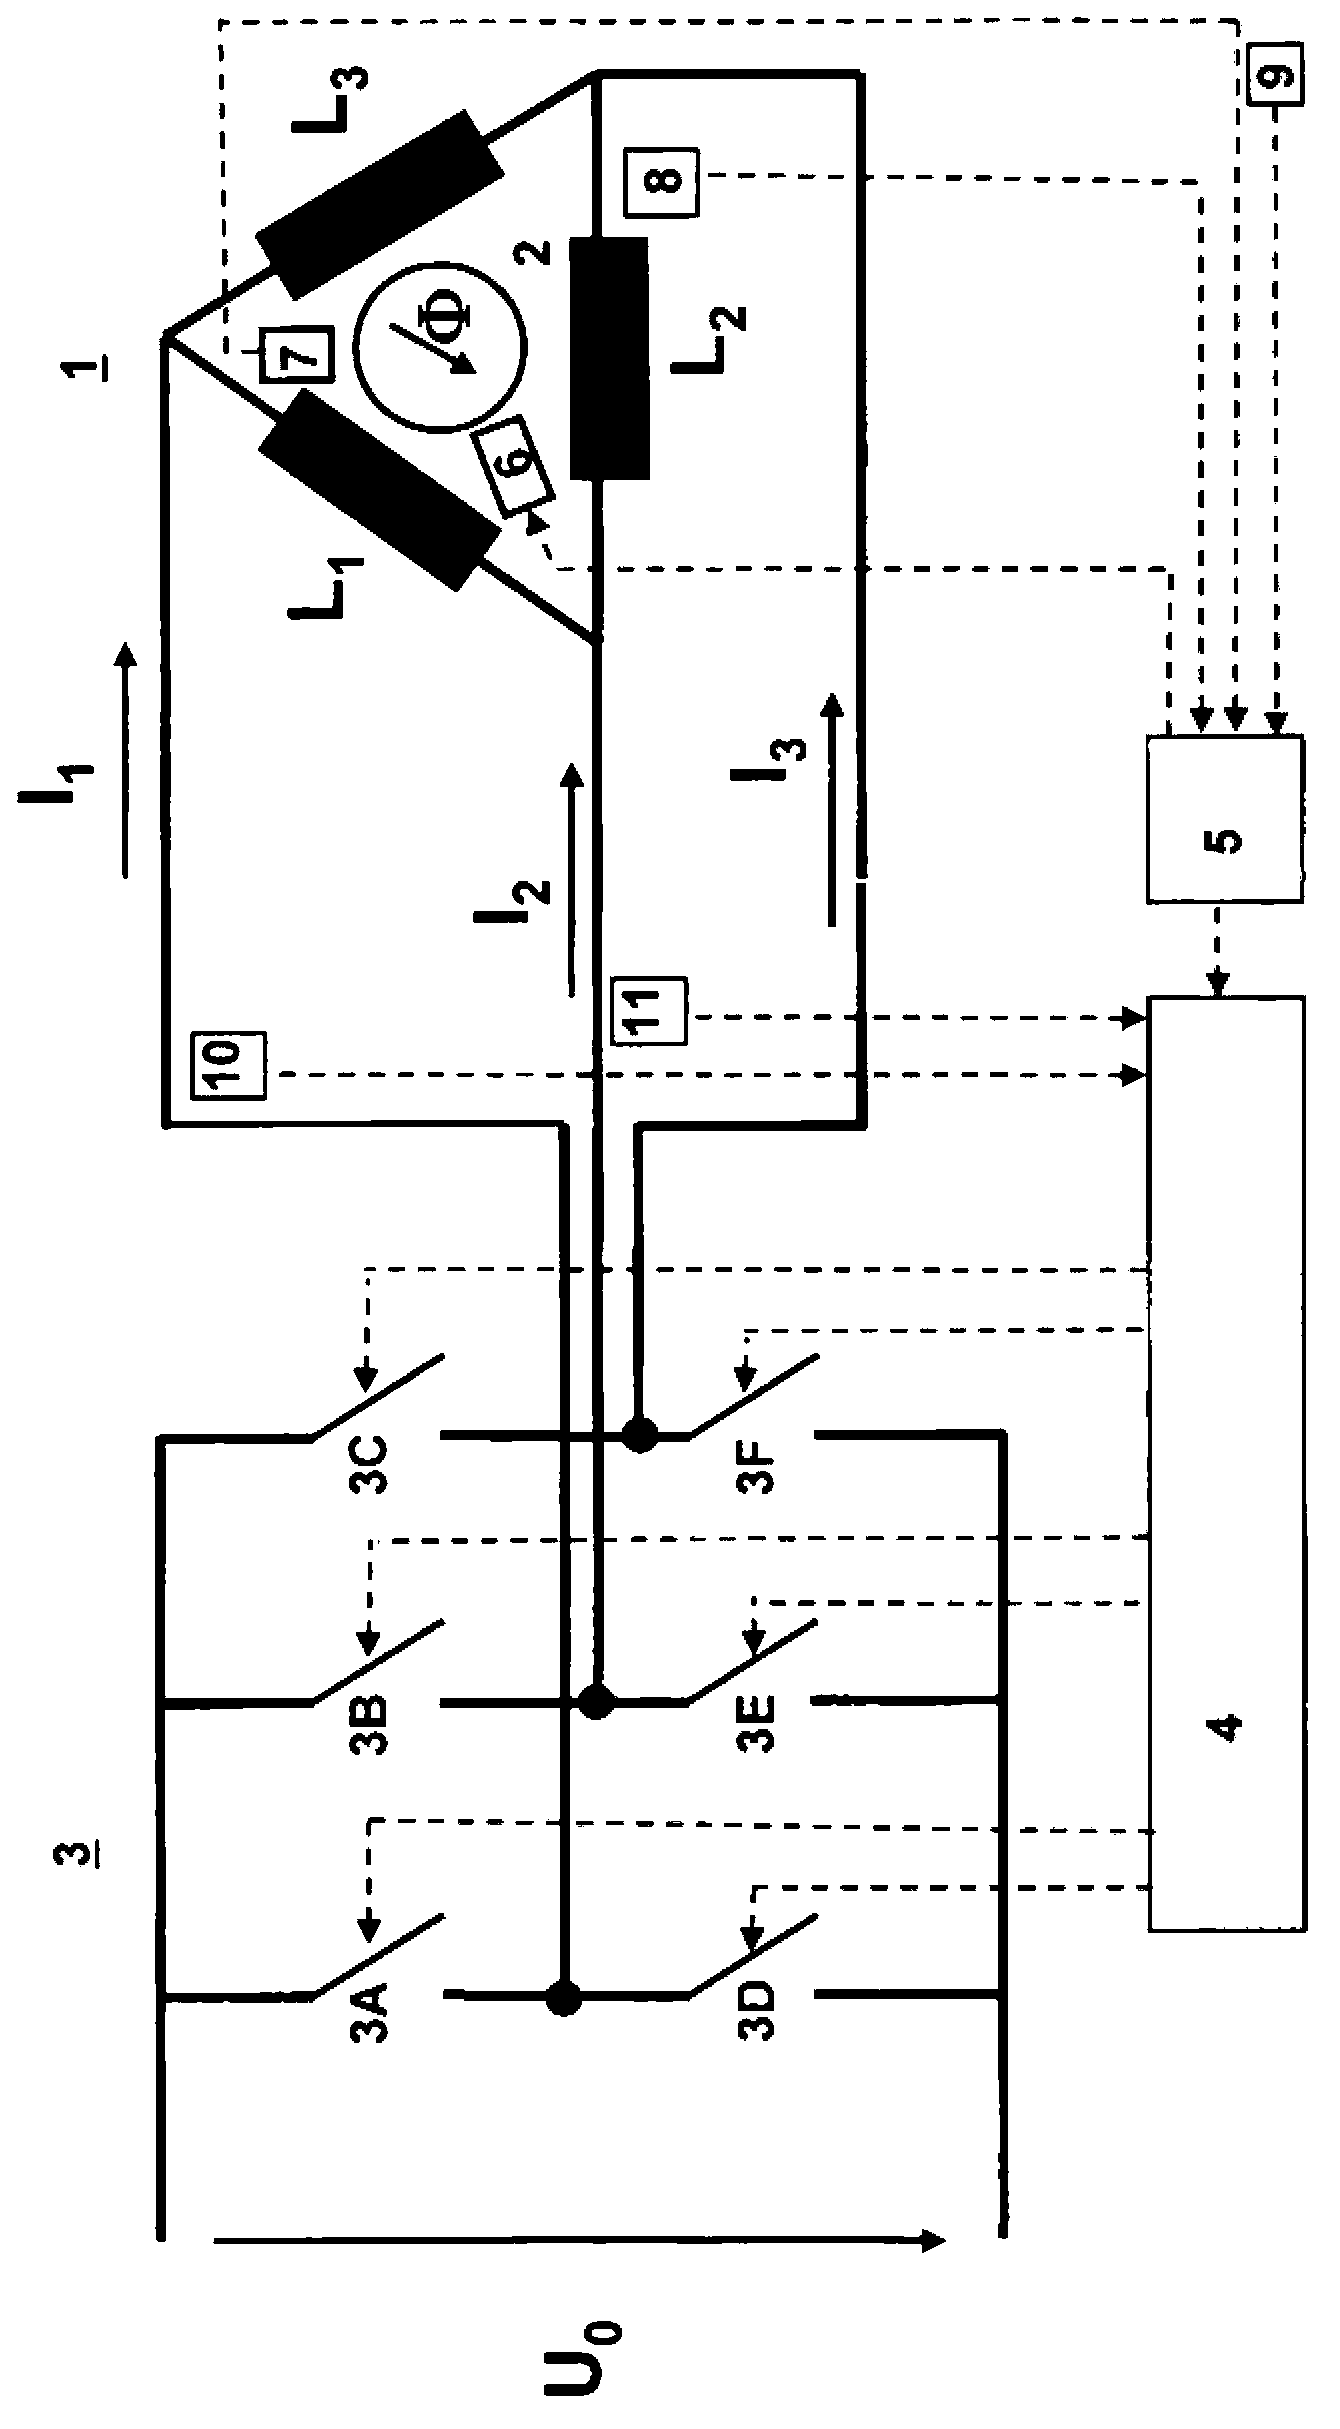 Method and system for heating of robots in cold environments